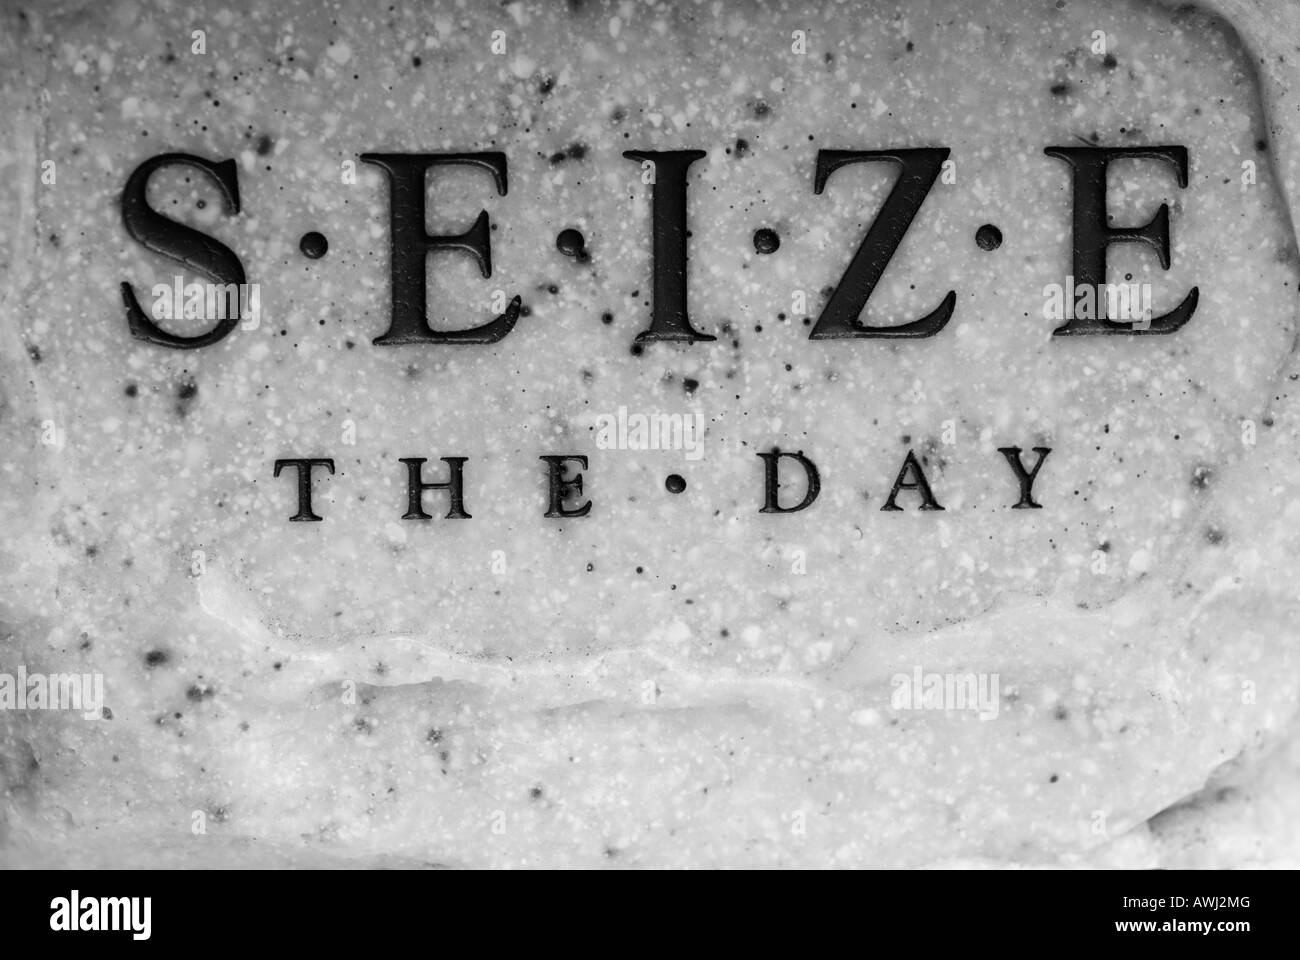 Stock photo of the words seize the day the english translation from the Latin phrase carpe diem Stock Photo